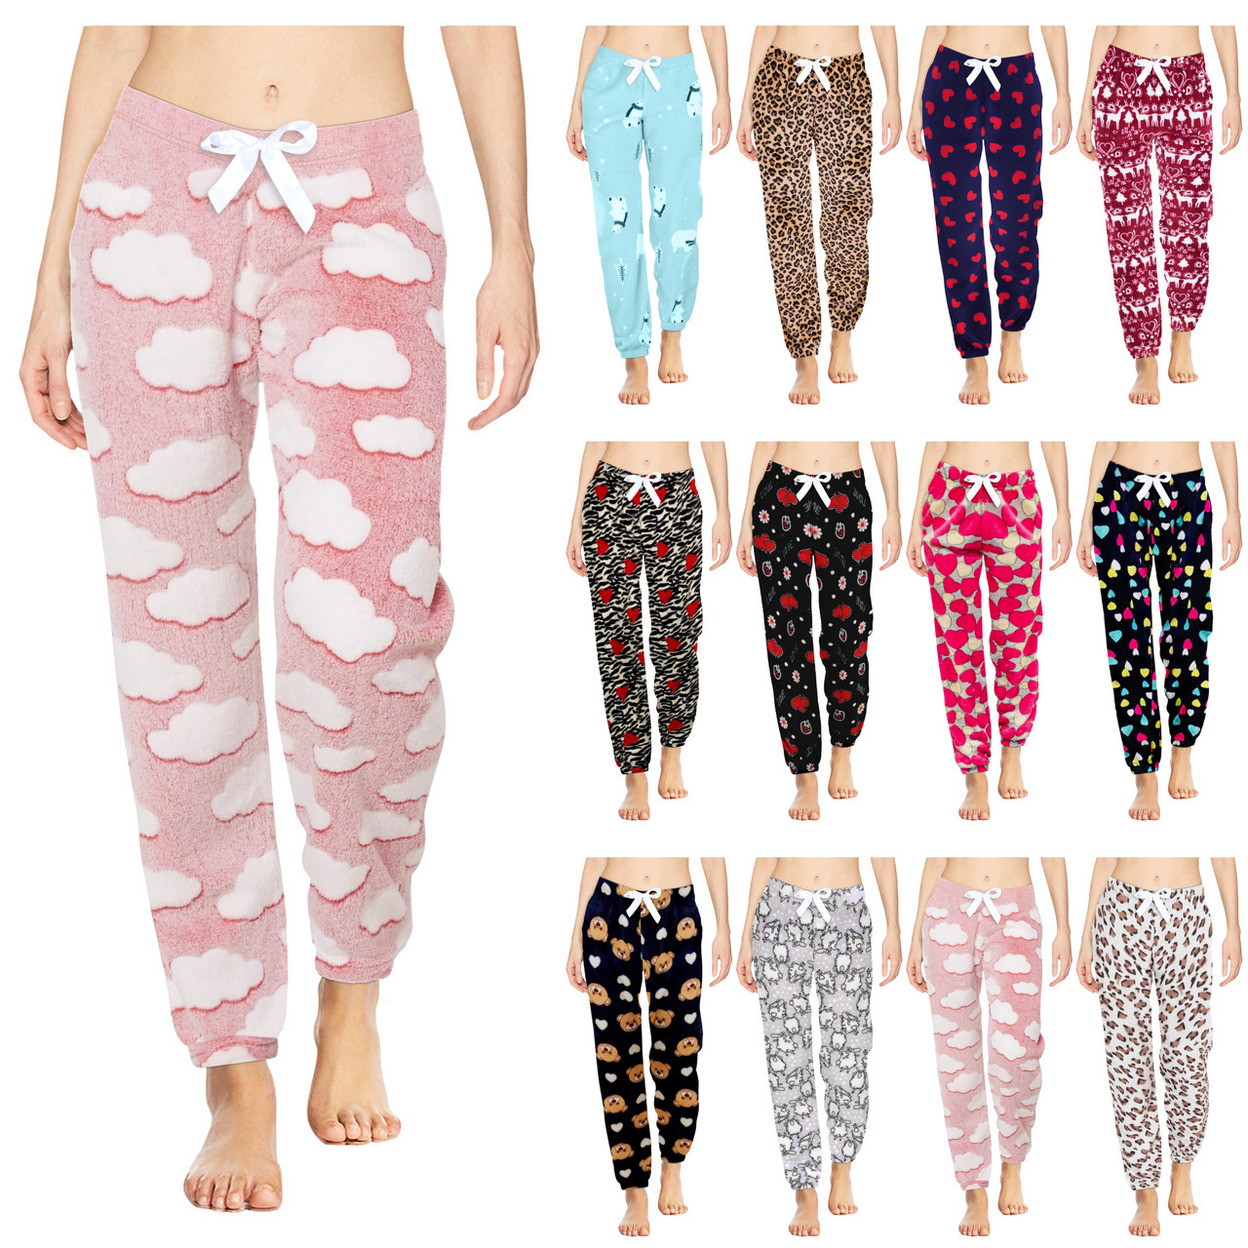 Multi-Pack: Women's Printed Ultra-Soft Comfy Stretch Micro-Fleece Pajama Lounge Pants - 3-pack, Shapes, Xx-large